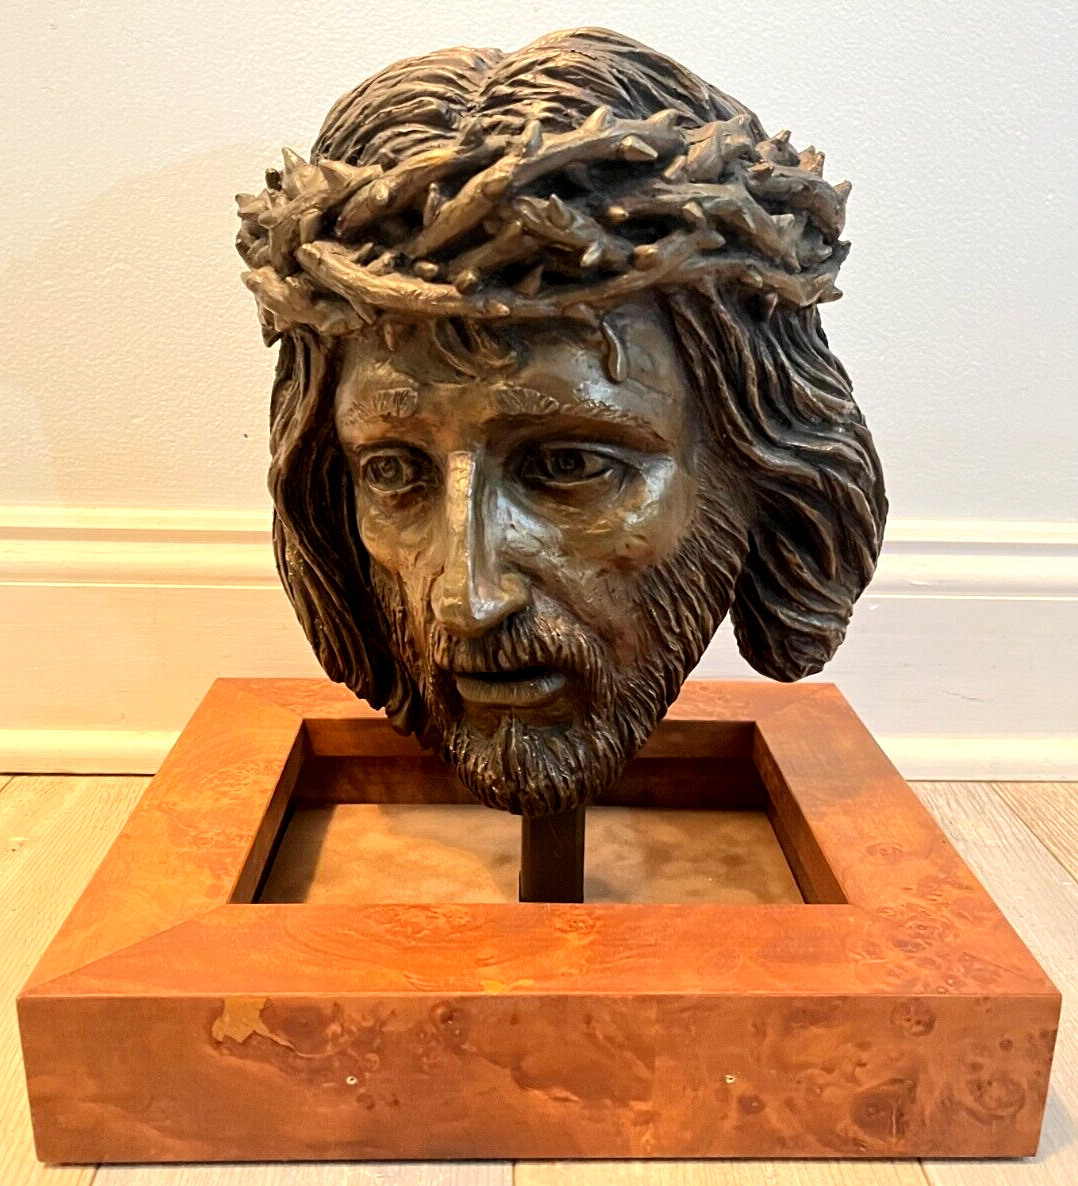 VERY RARE LARGE HEAVY SOLID BRONZE BUST OF THE CRUCIFIED JESUS STATUE SCULPTURE